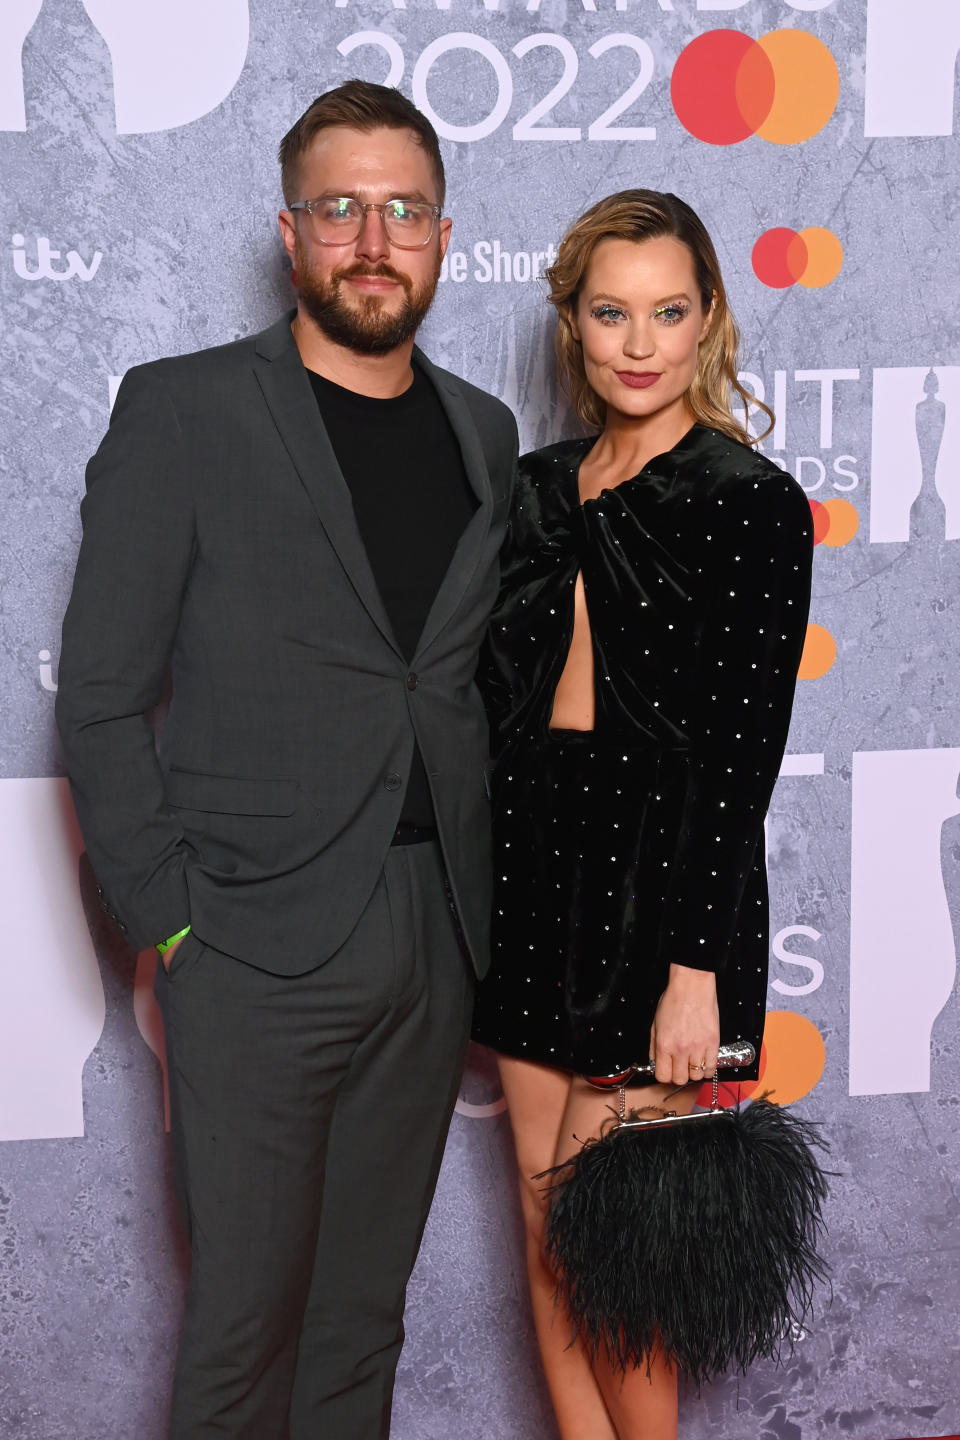 The TV star married Iain Stirling in November 2020. (Getty Images)